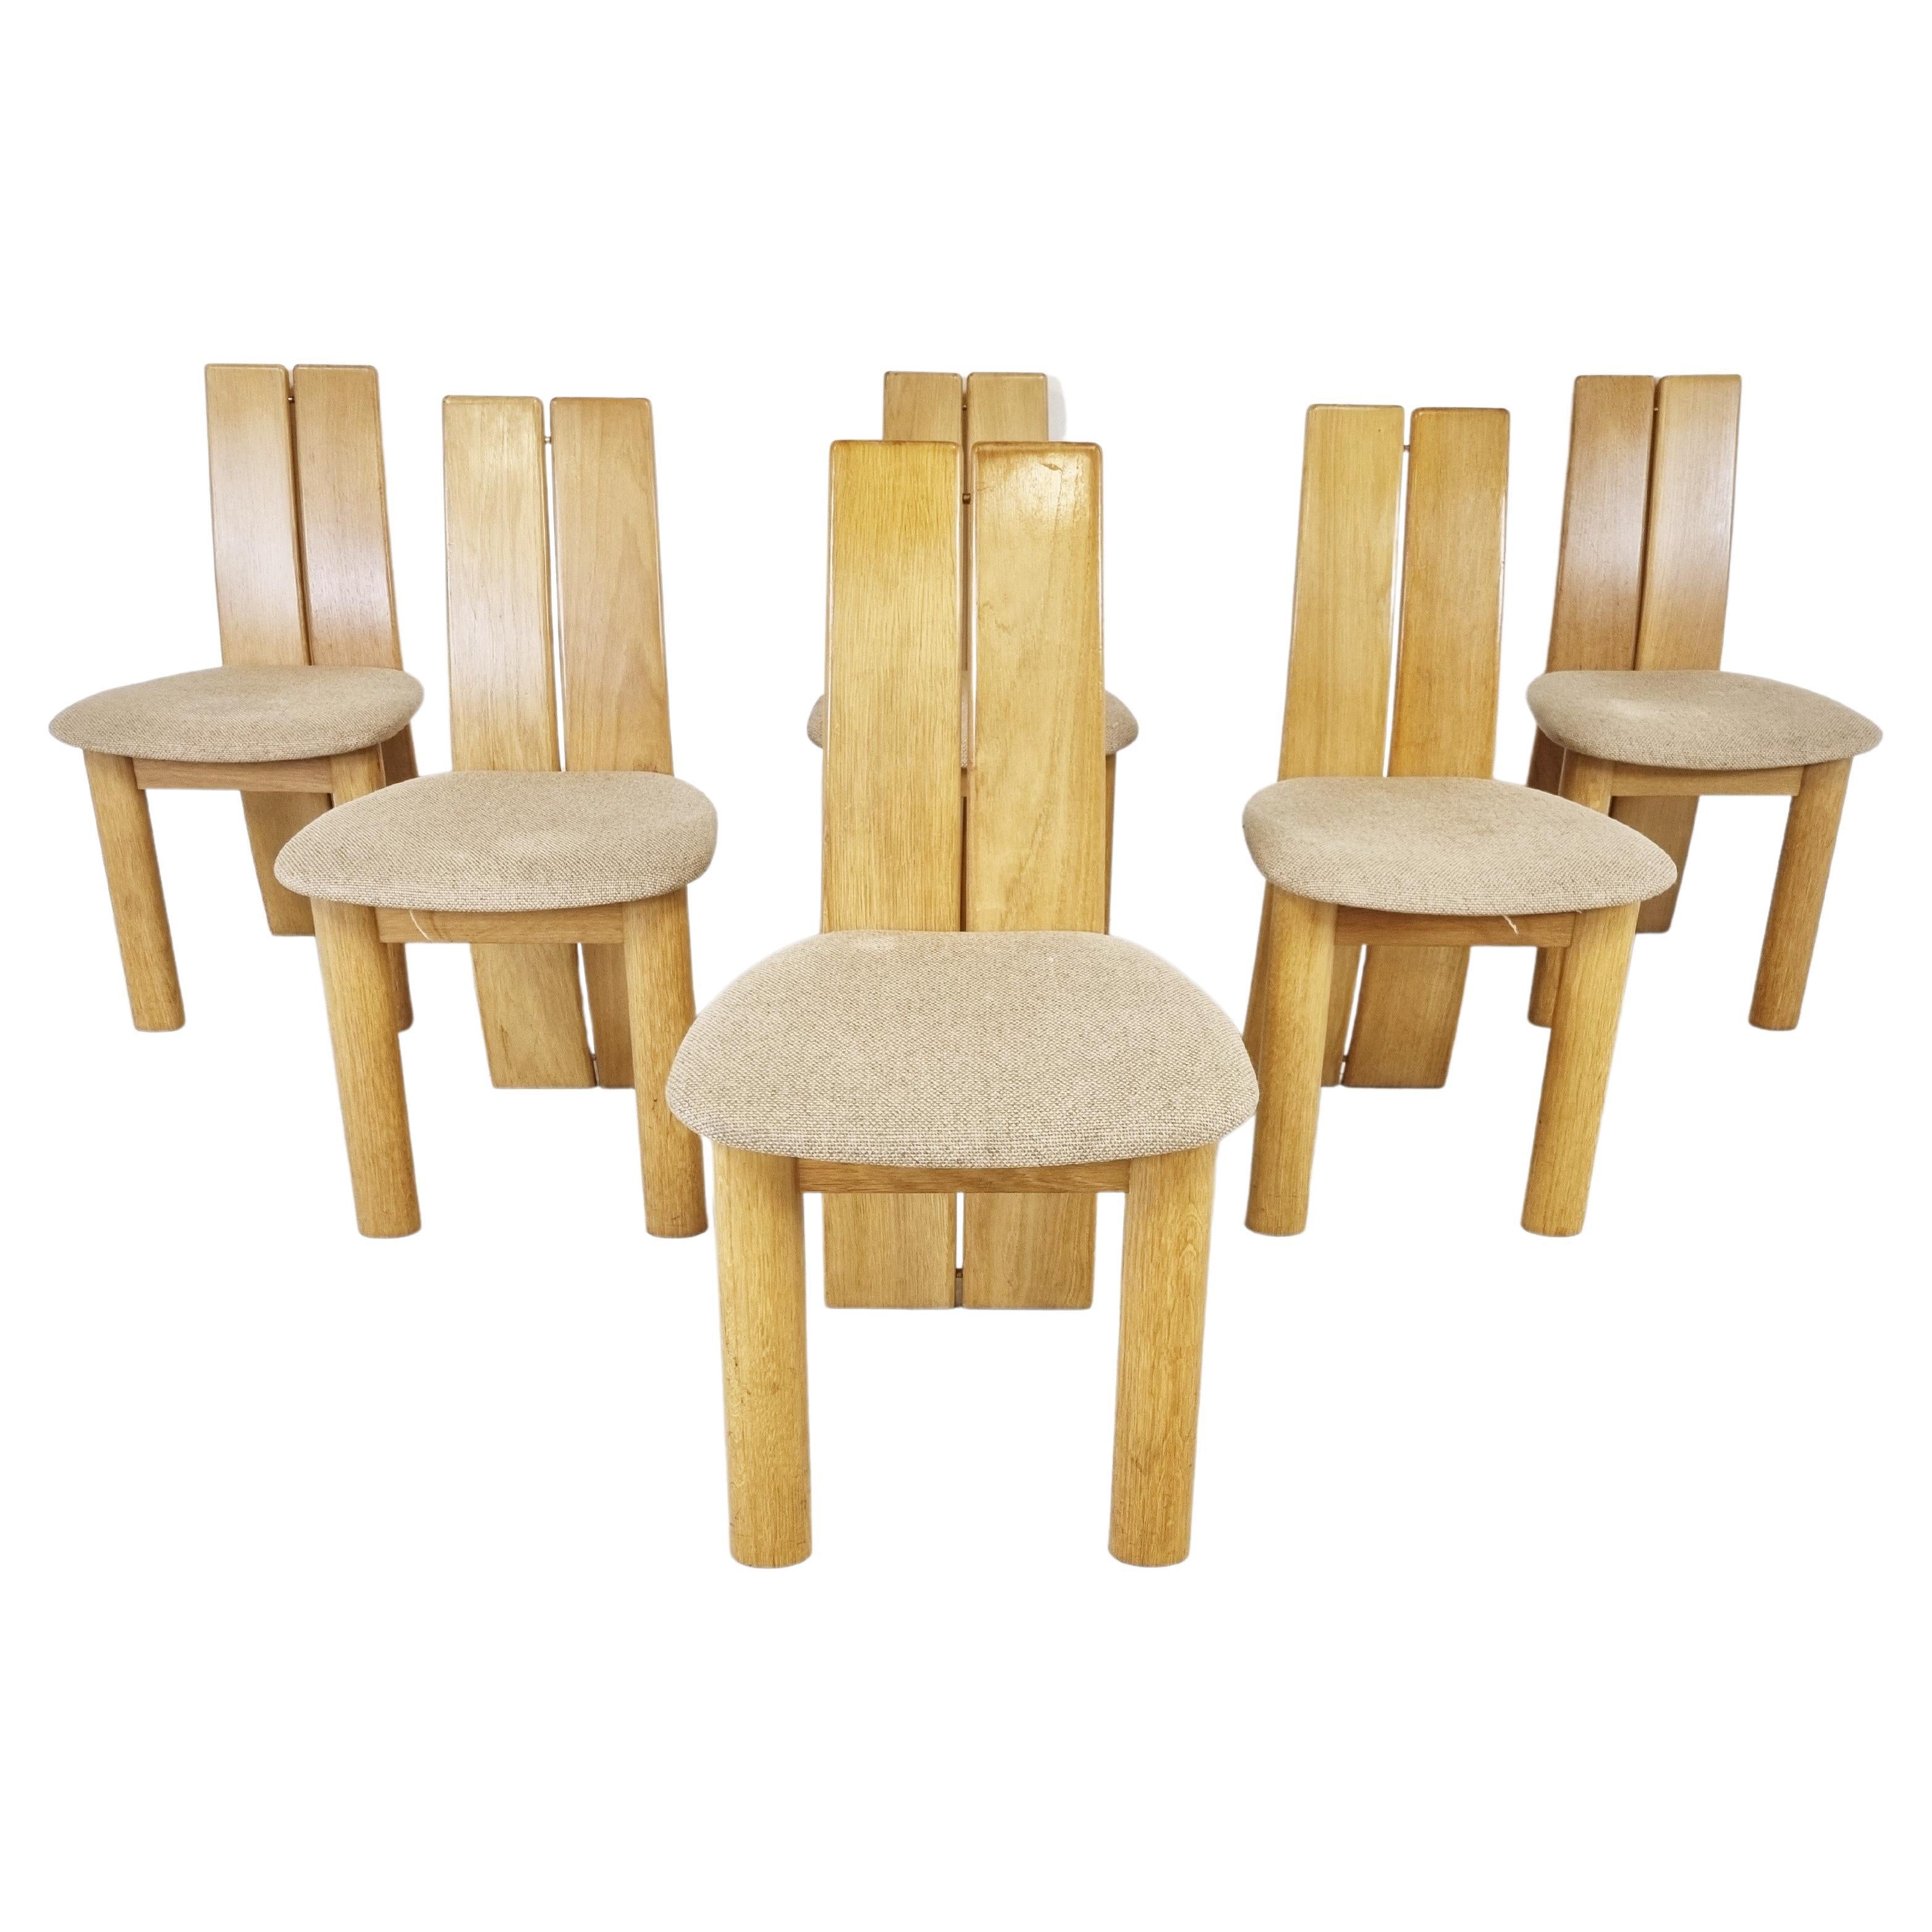 Set of 6 Dining Chairs by Rob & Dries Van Den Berghe, 1980s